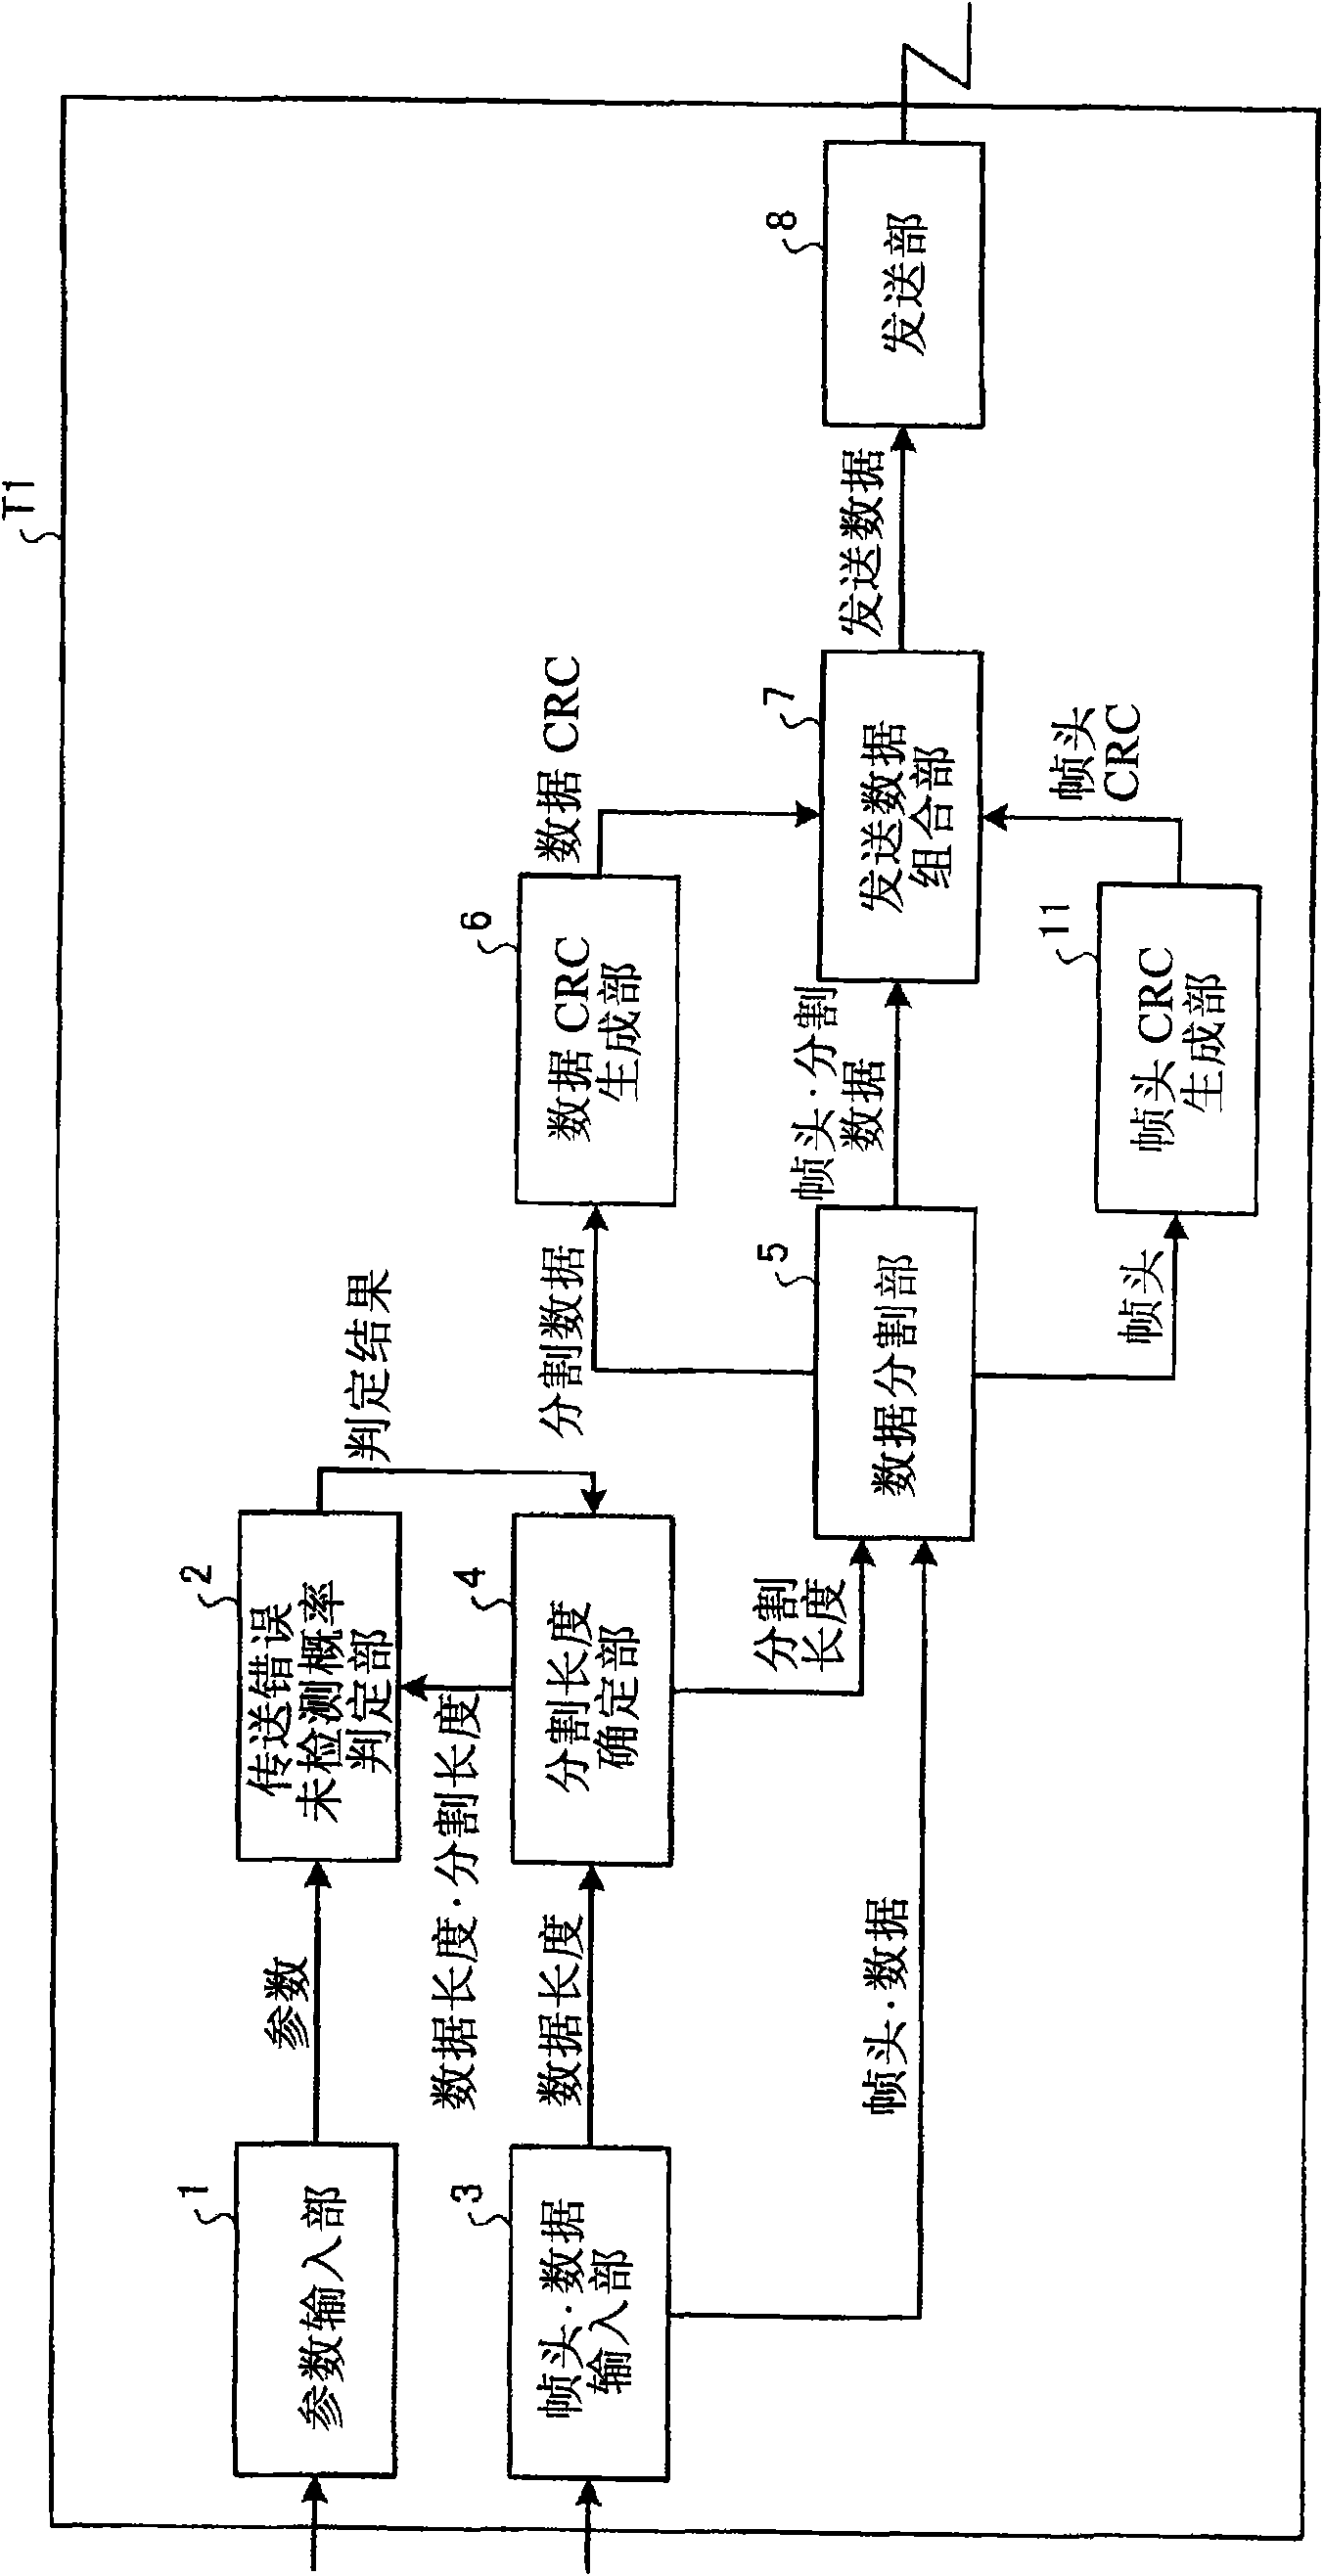 Transmitter apparatus and communication system